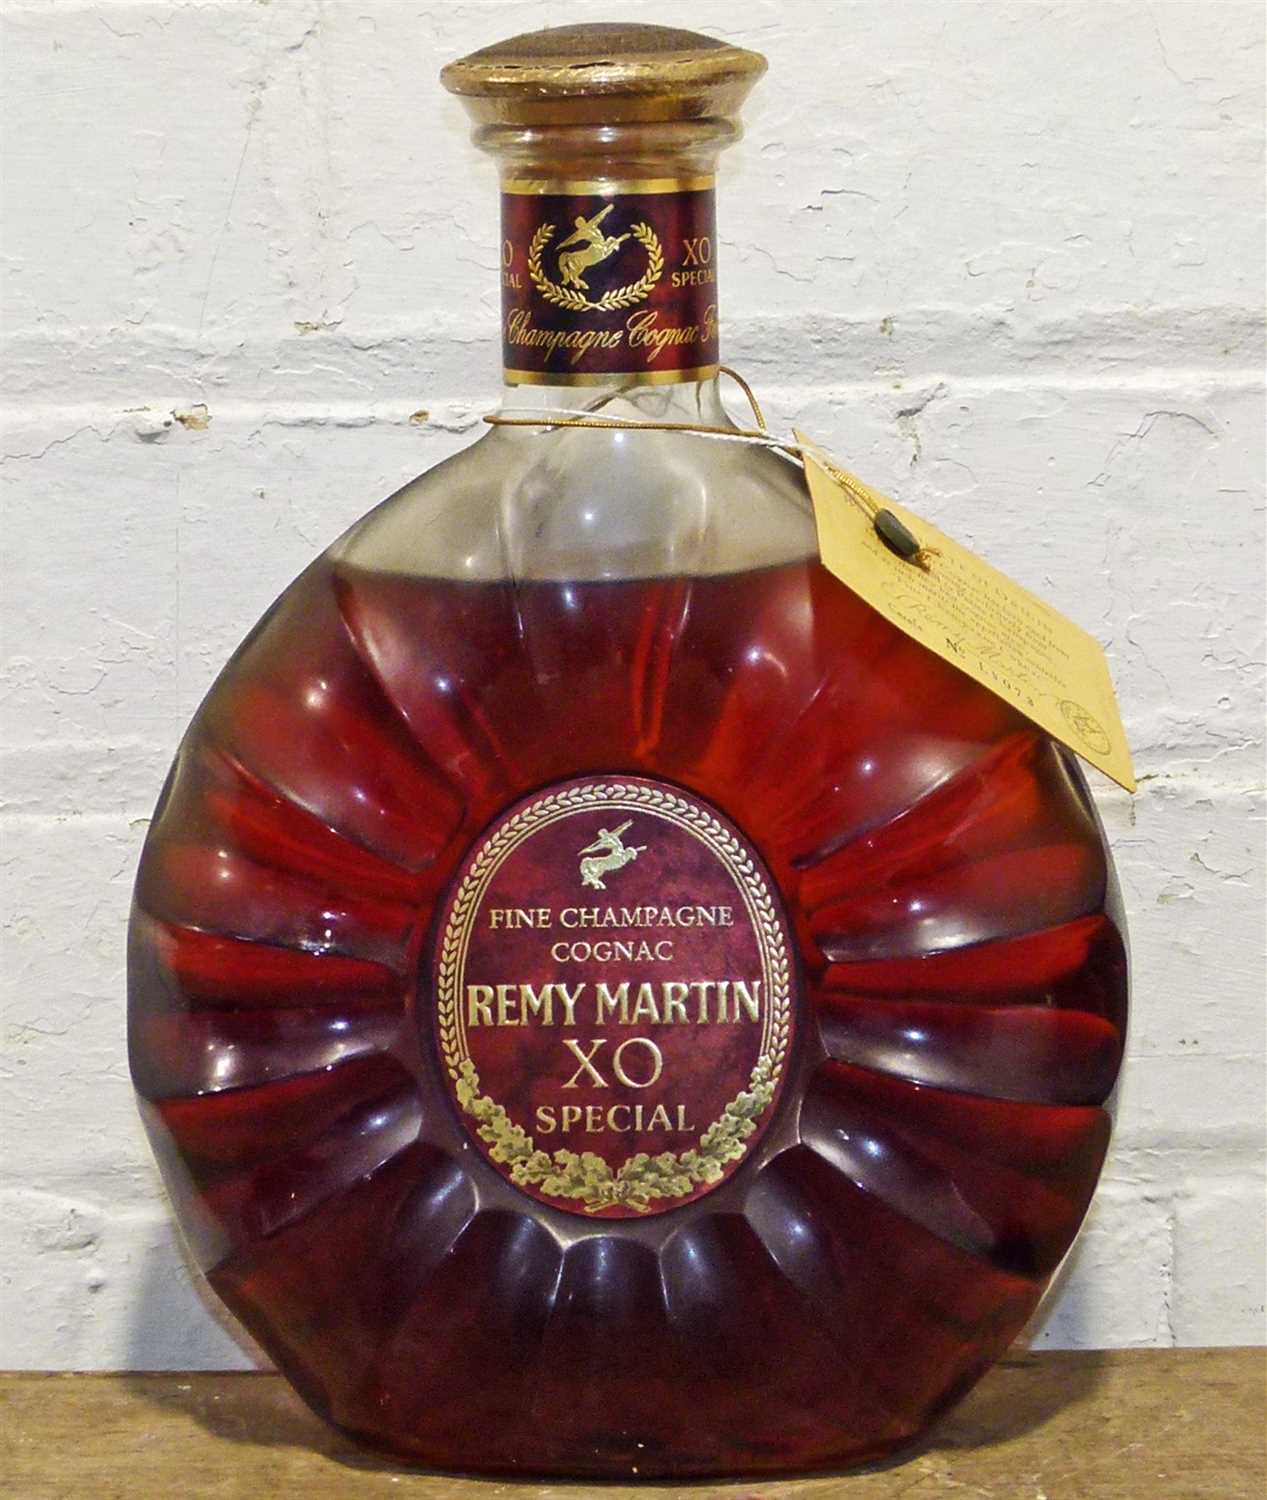 Lot 66 - 1 x 1.5 Litre ‘Carafe’ Bottle Cognac Remy Martin XO Special with Certificate (Carafe No. LV 073